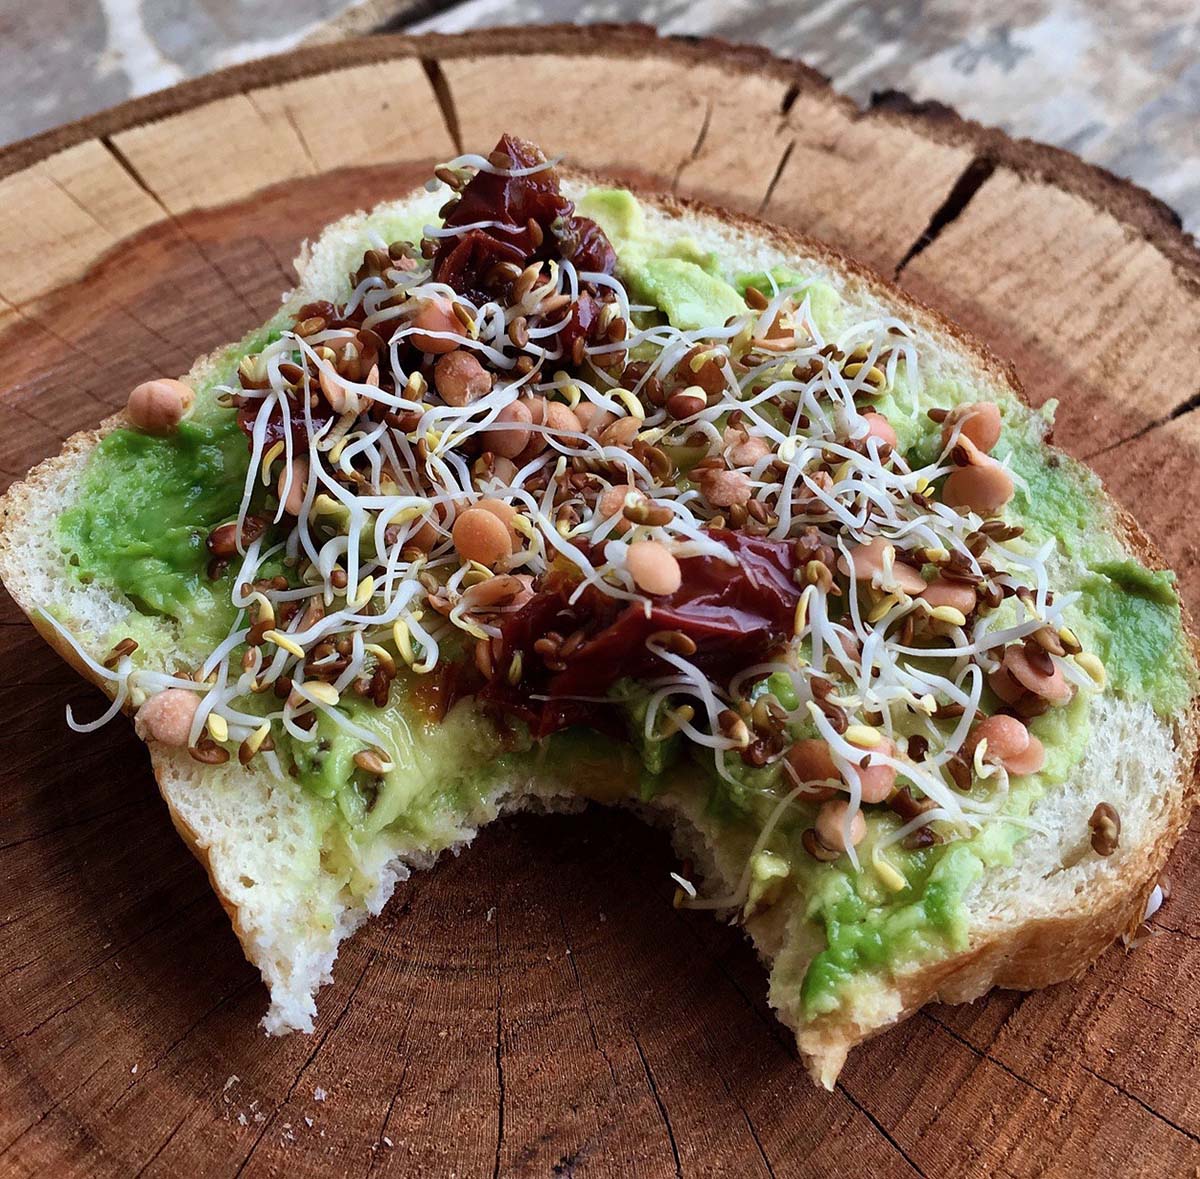 HEALTHY SNACKING | Bread with Avocado, Sundried Tomatoes and homemade Sprouts